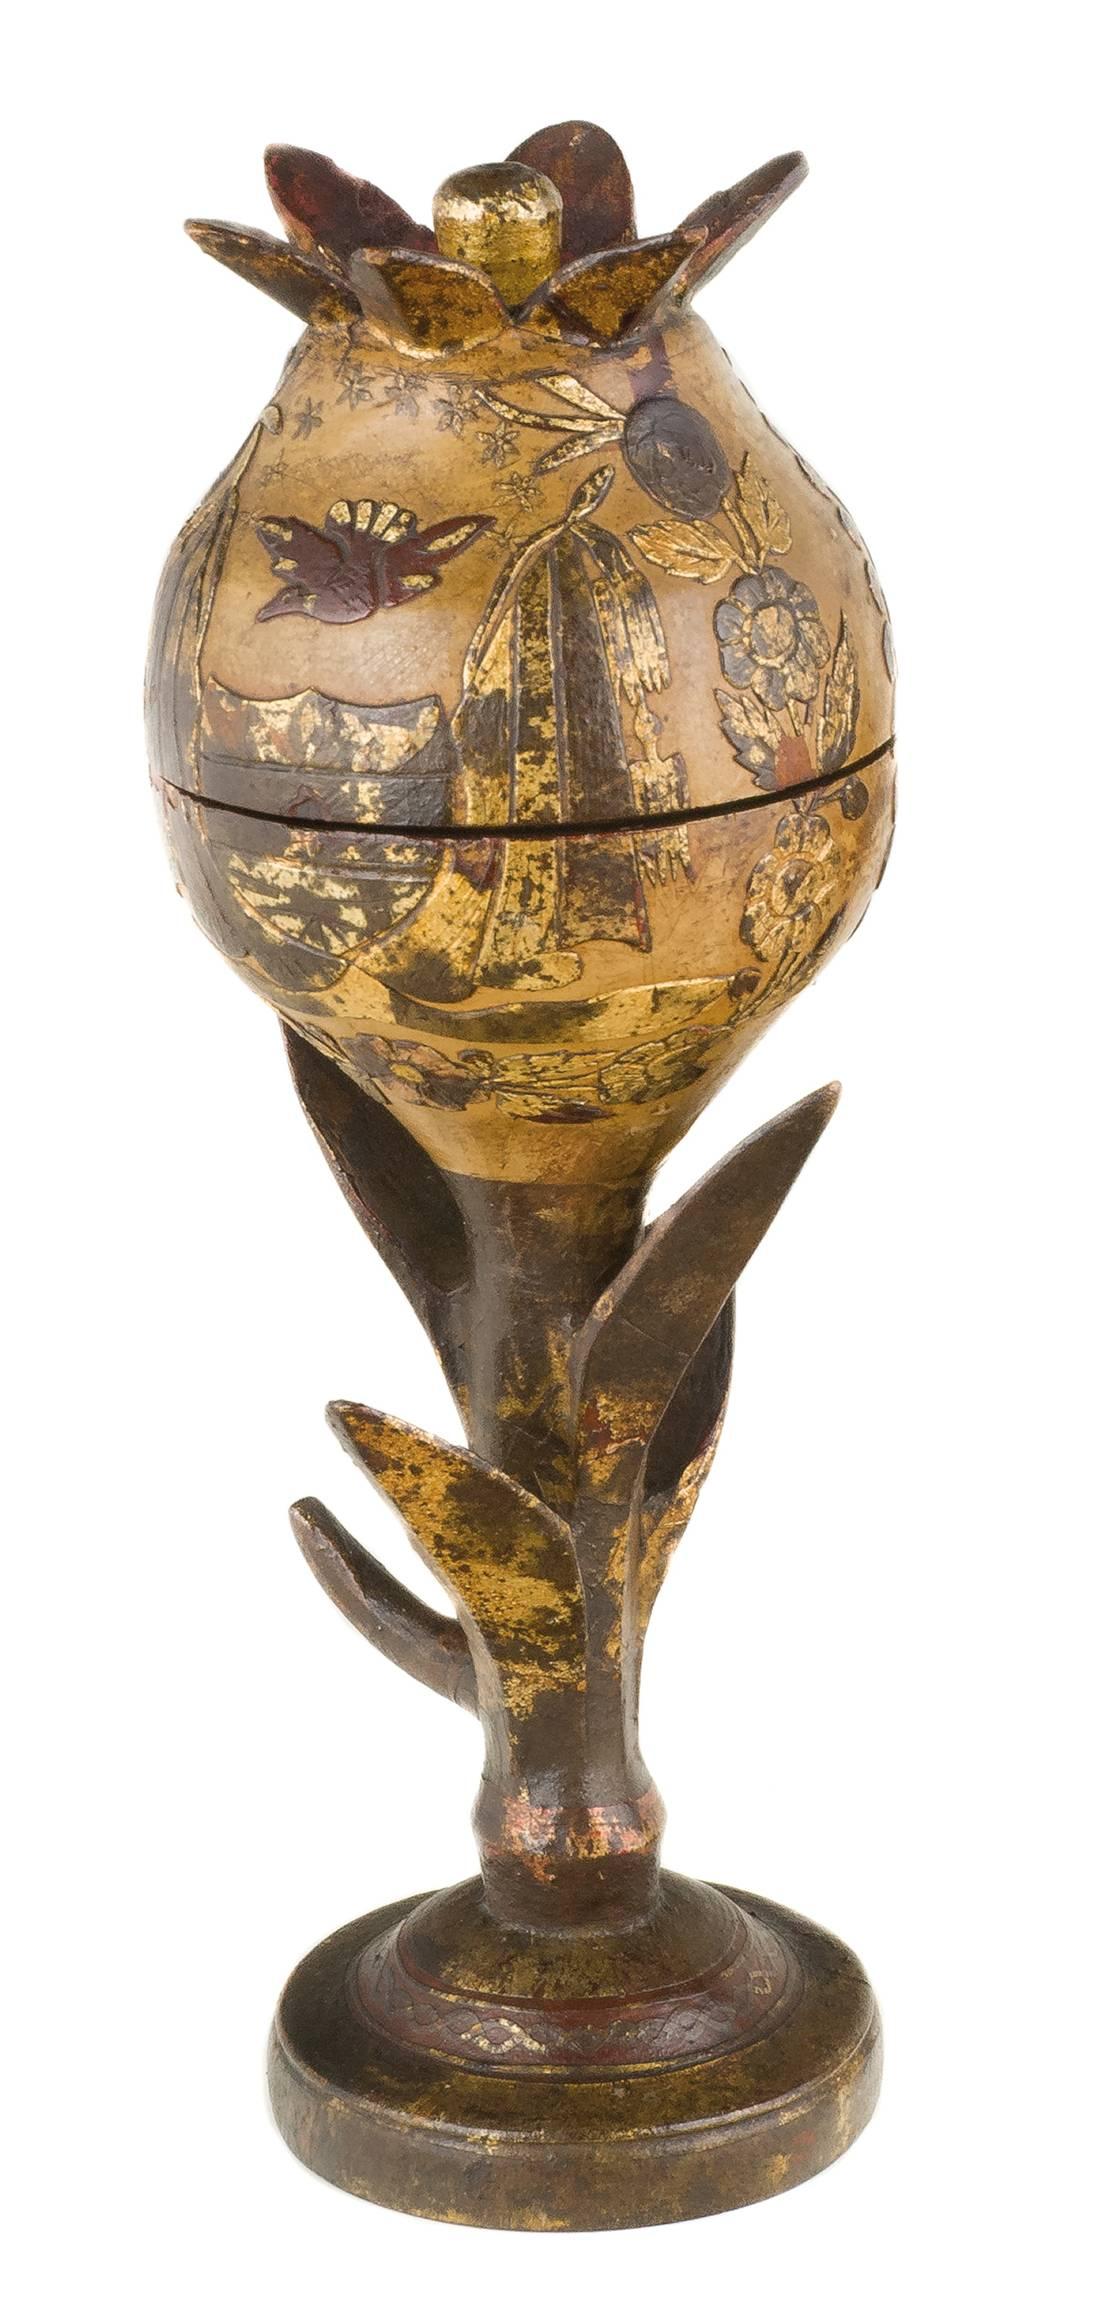 Cup with cover.
Colombia, 17th century.
Carved wood
Coat of arms and flowers in “pasto” varnish decoration
Measures: Height 29 cm.